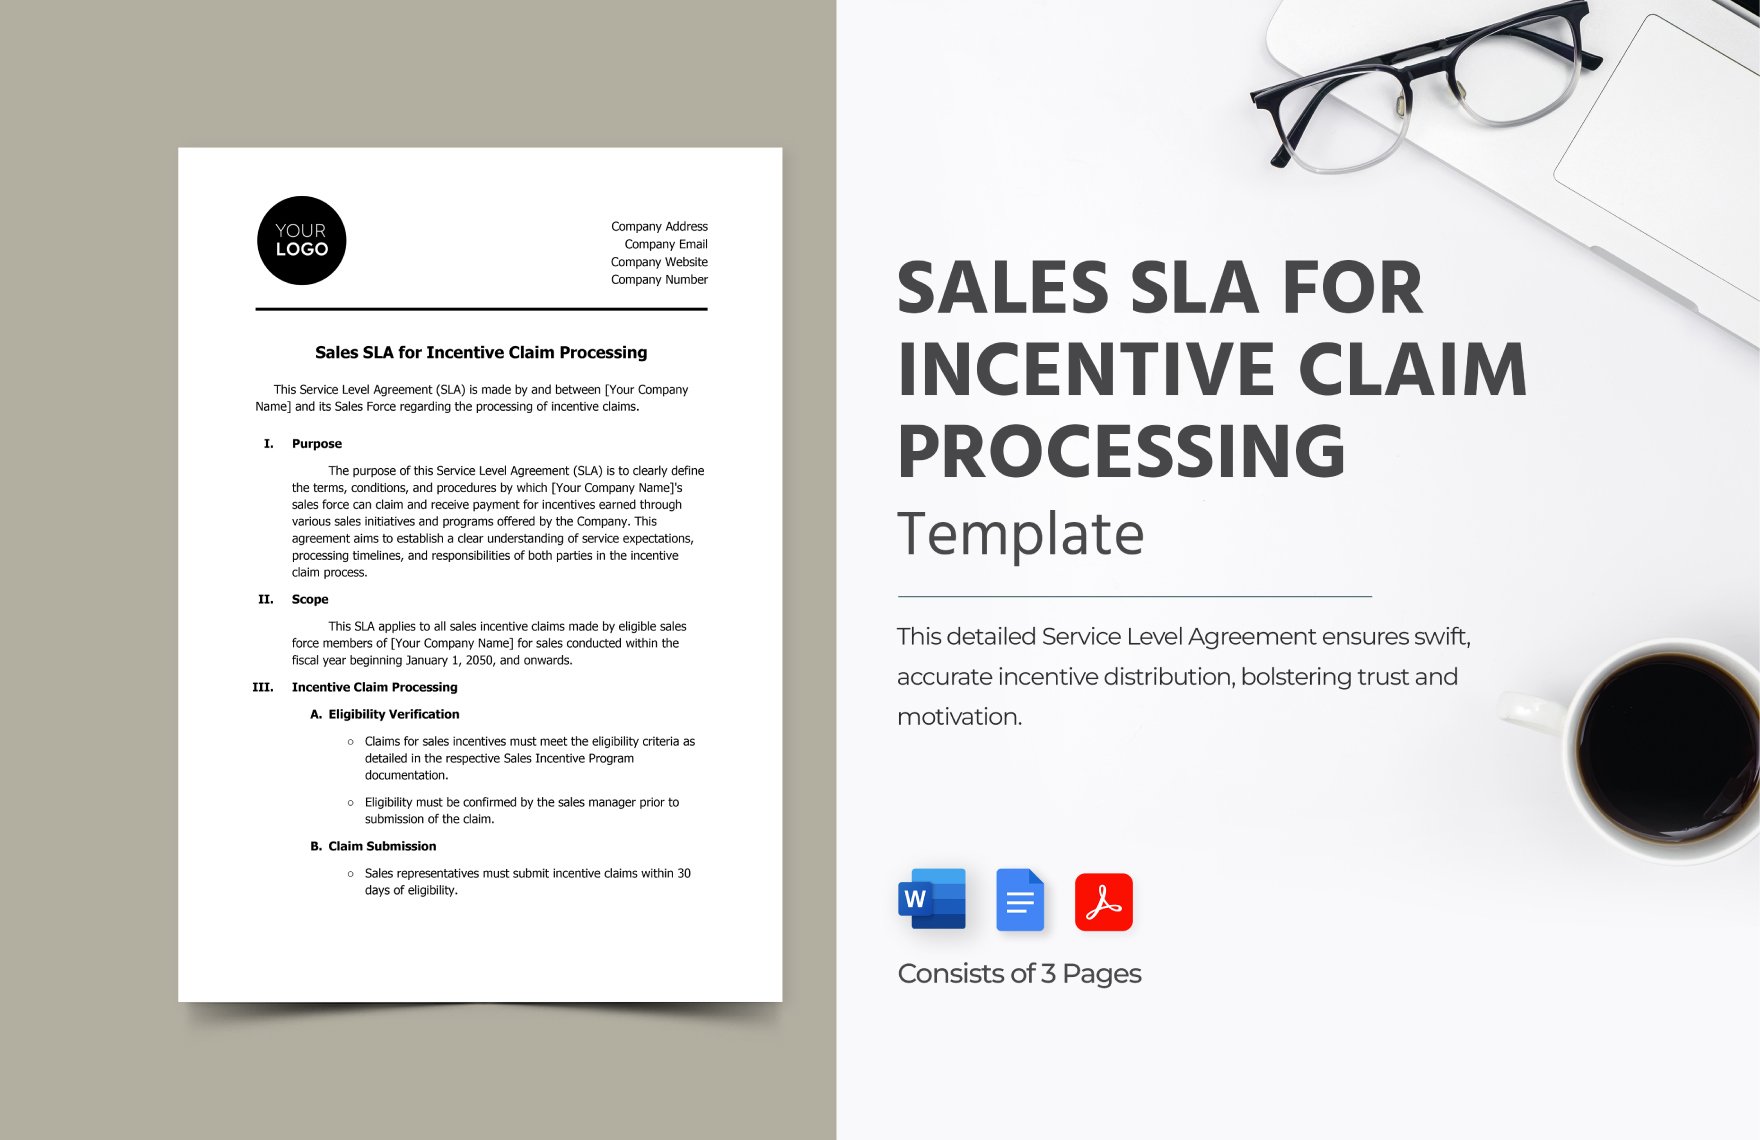 Sales SLA for Incentive Claim Processing Template